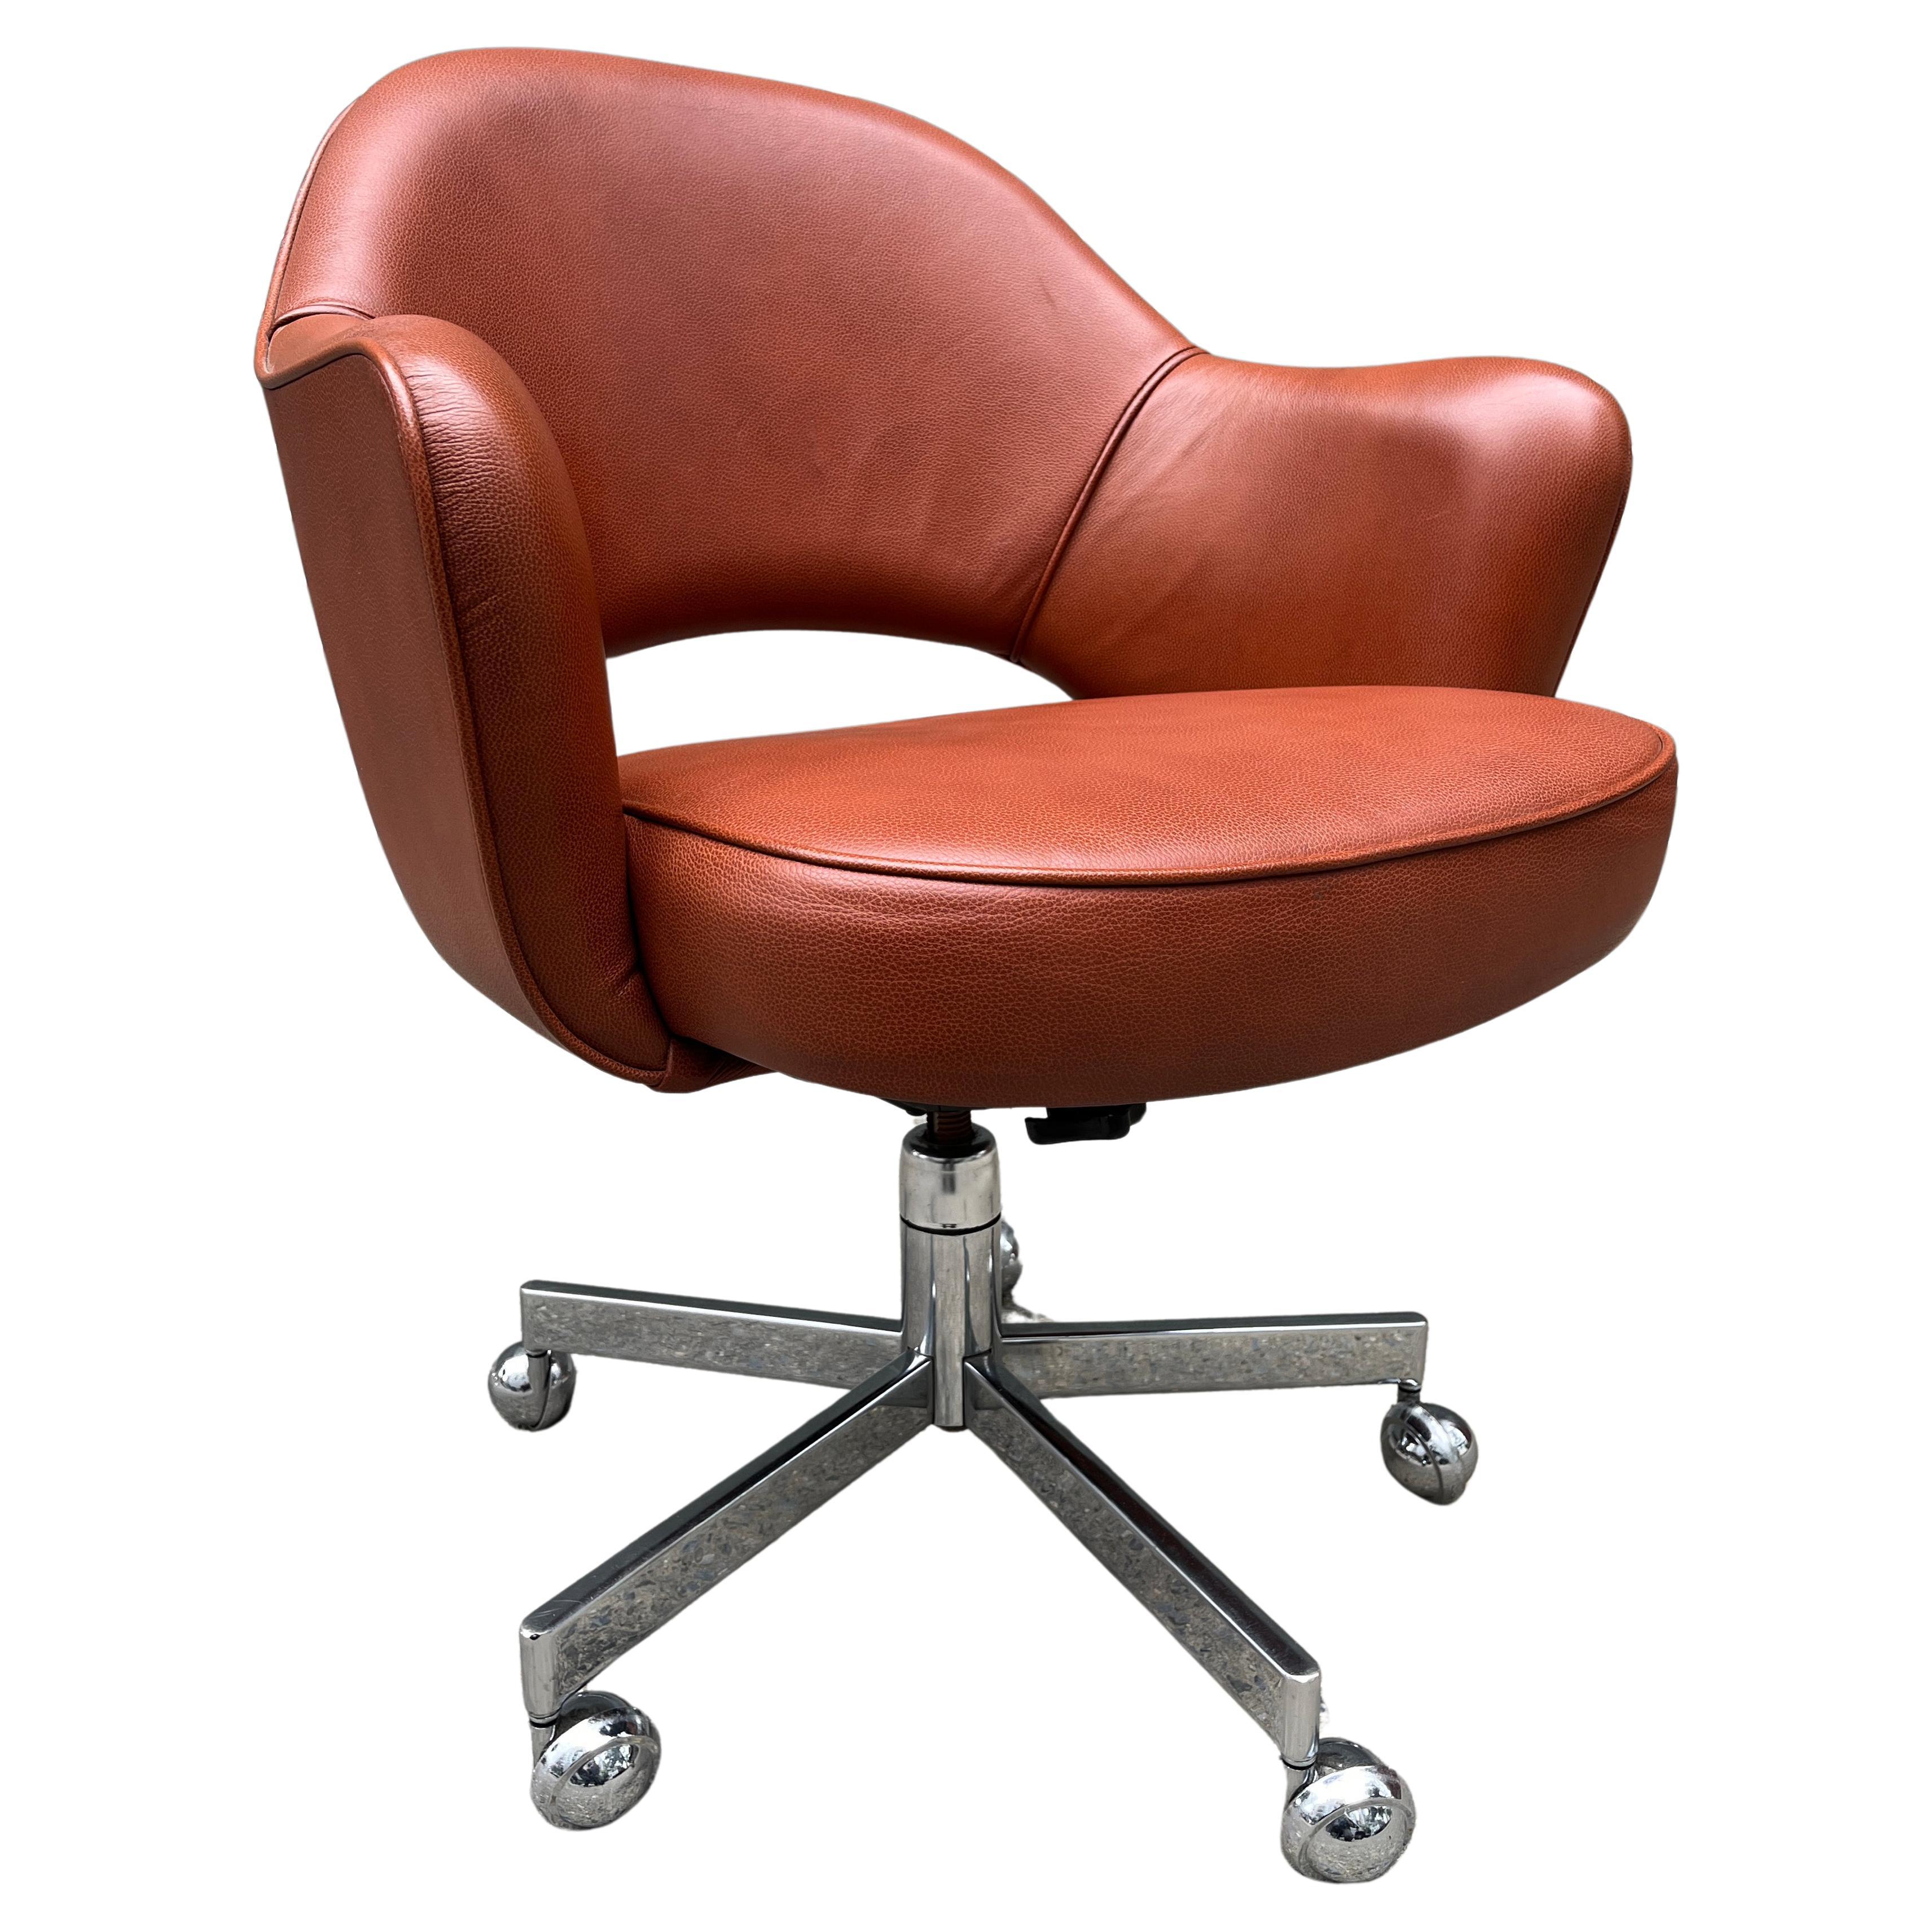 Midcentury Saarinen Executive chair in reddish brown / burns sienna leather. With manual adjustable height and tilt positions on a highly desirable chromed 5 star base. This iconic design has been a favorite in both the home and corporate settings